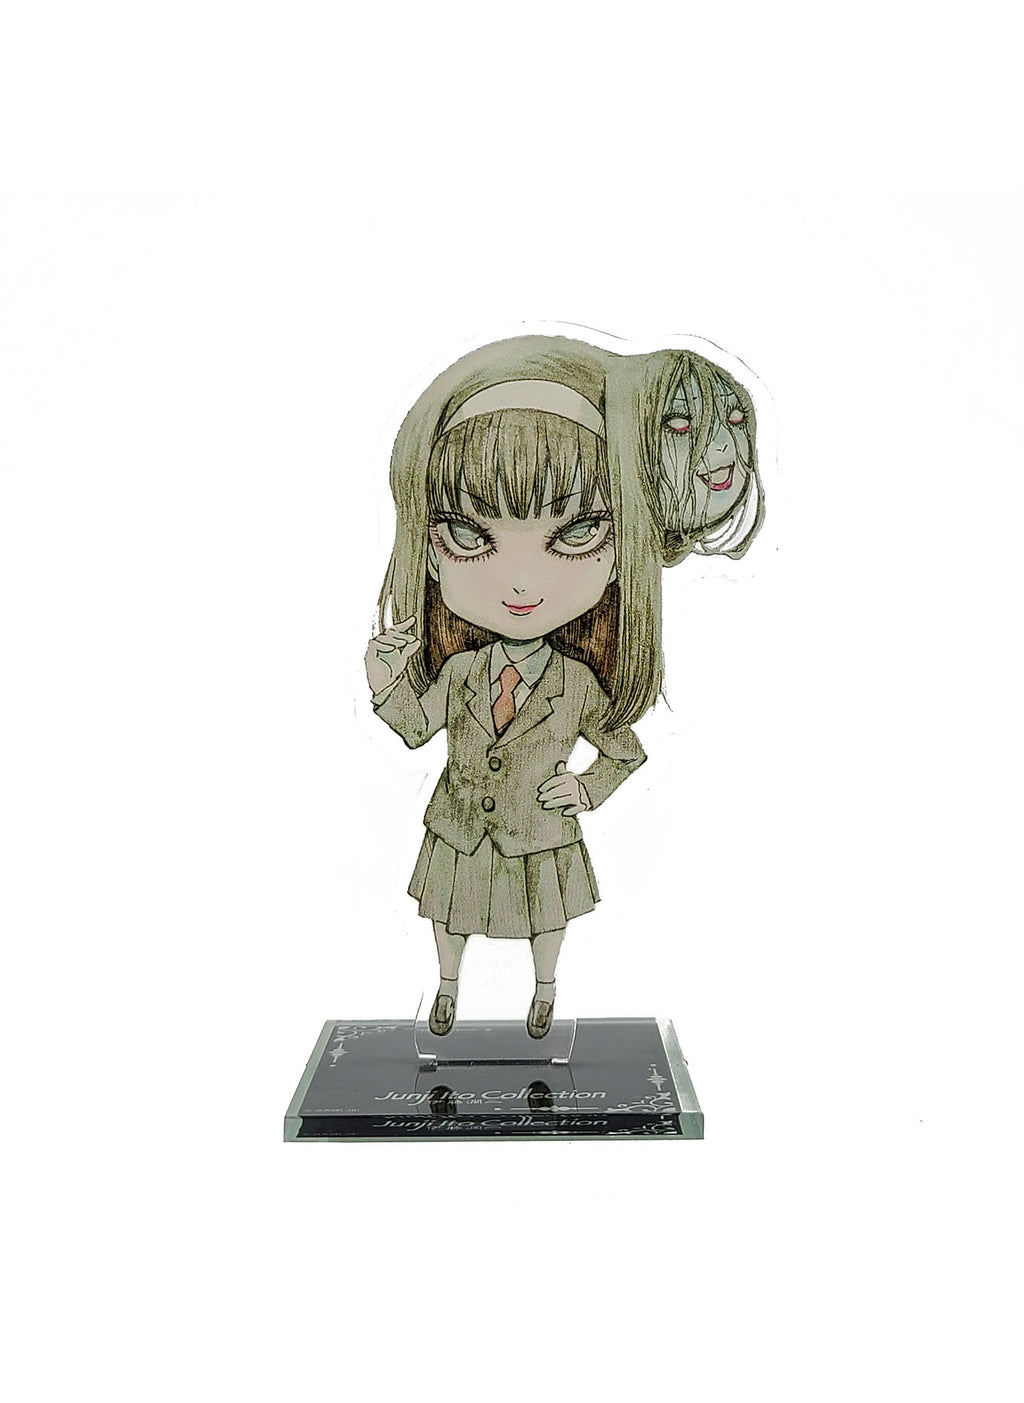  ABYSTYLE Junji Ito Collection Twin Pack Acrylic Stand